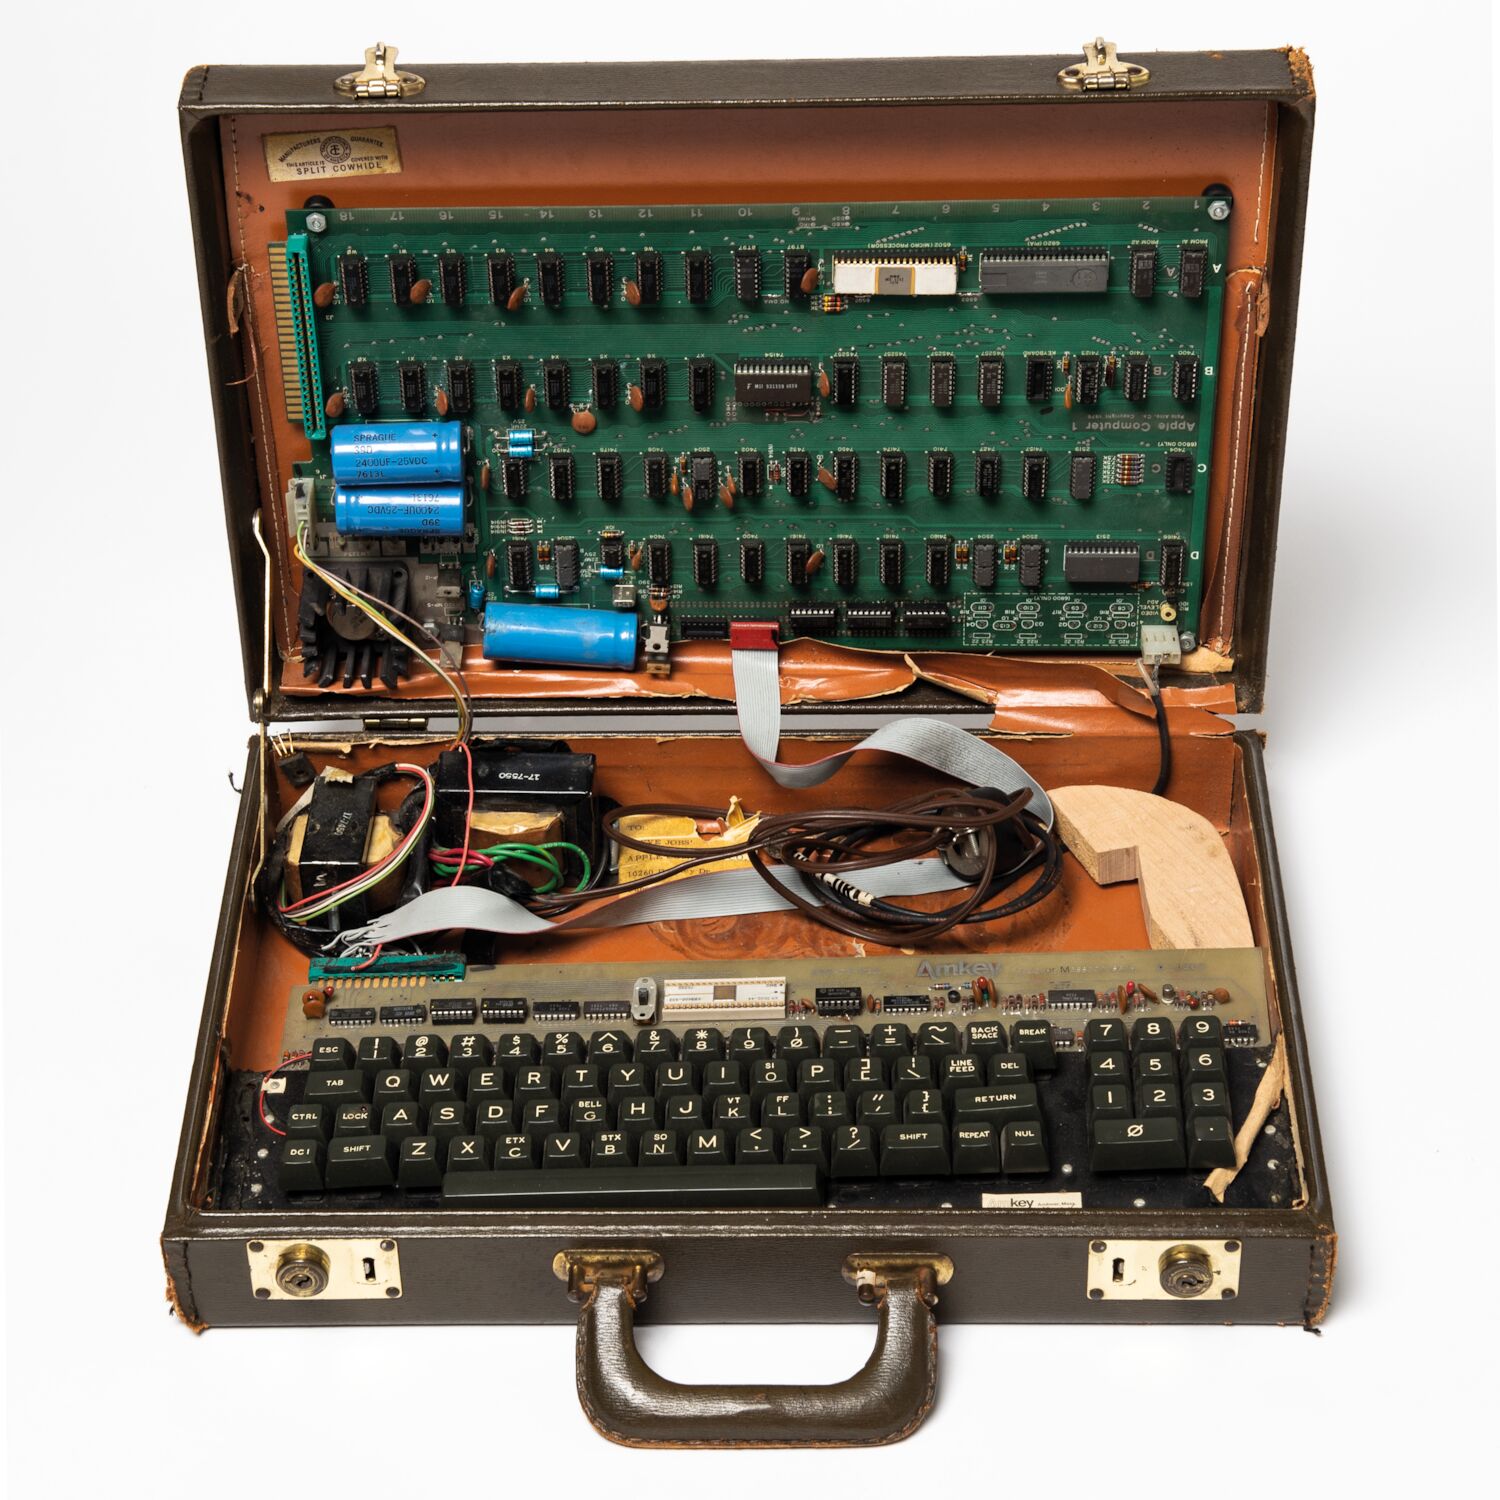 An open briefcase. The top half houses an Apple I circuit board, wired up to a keyboard in the bottom half.